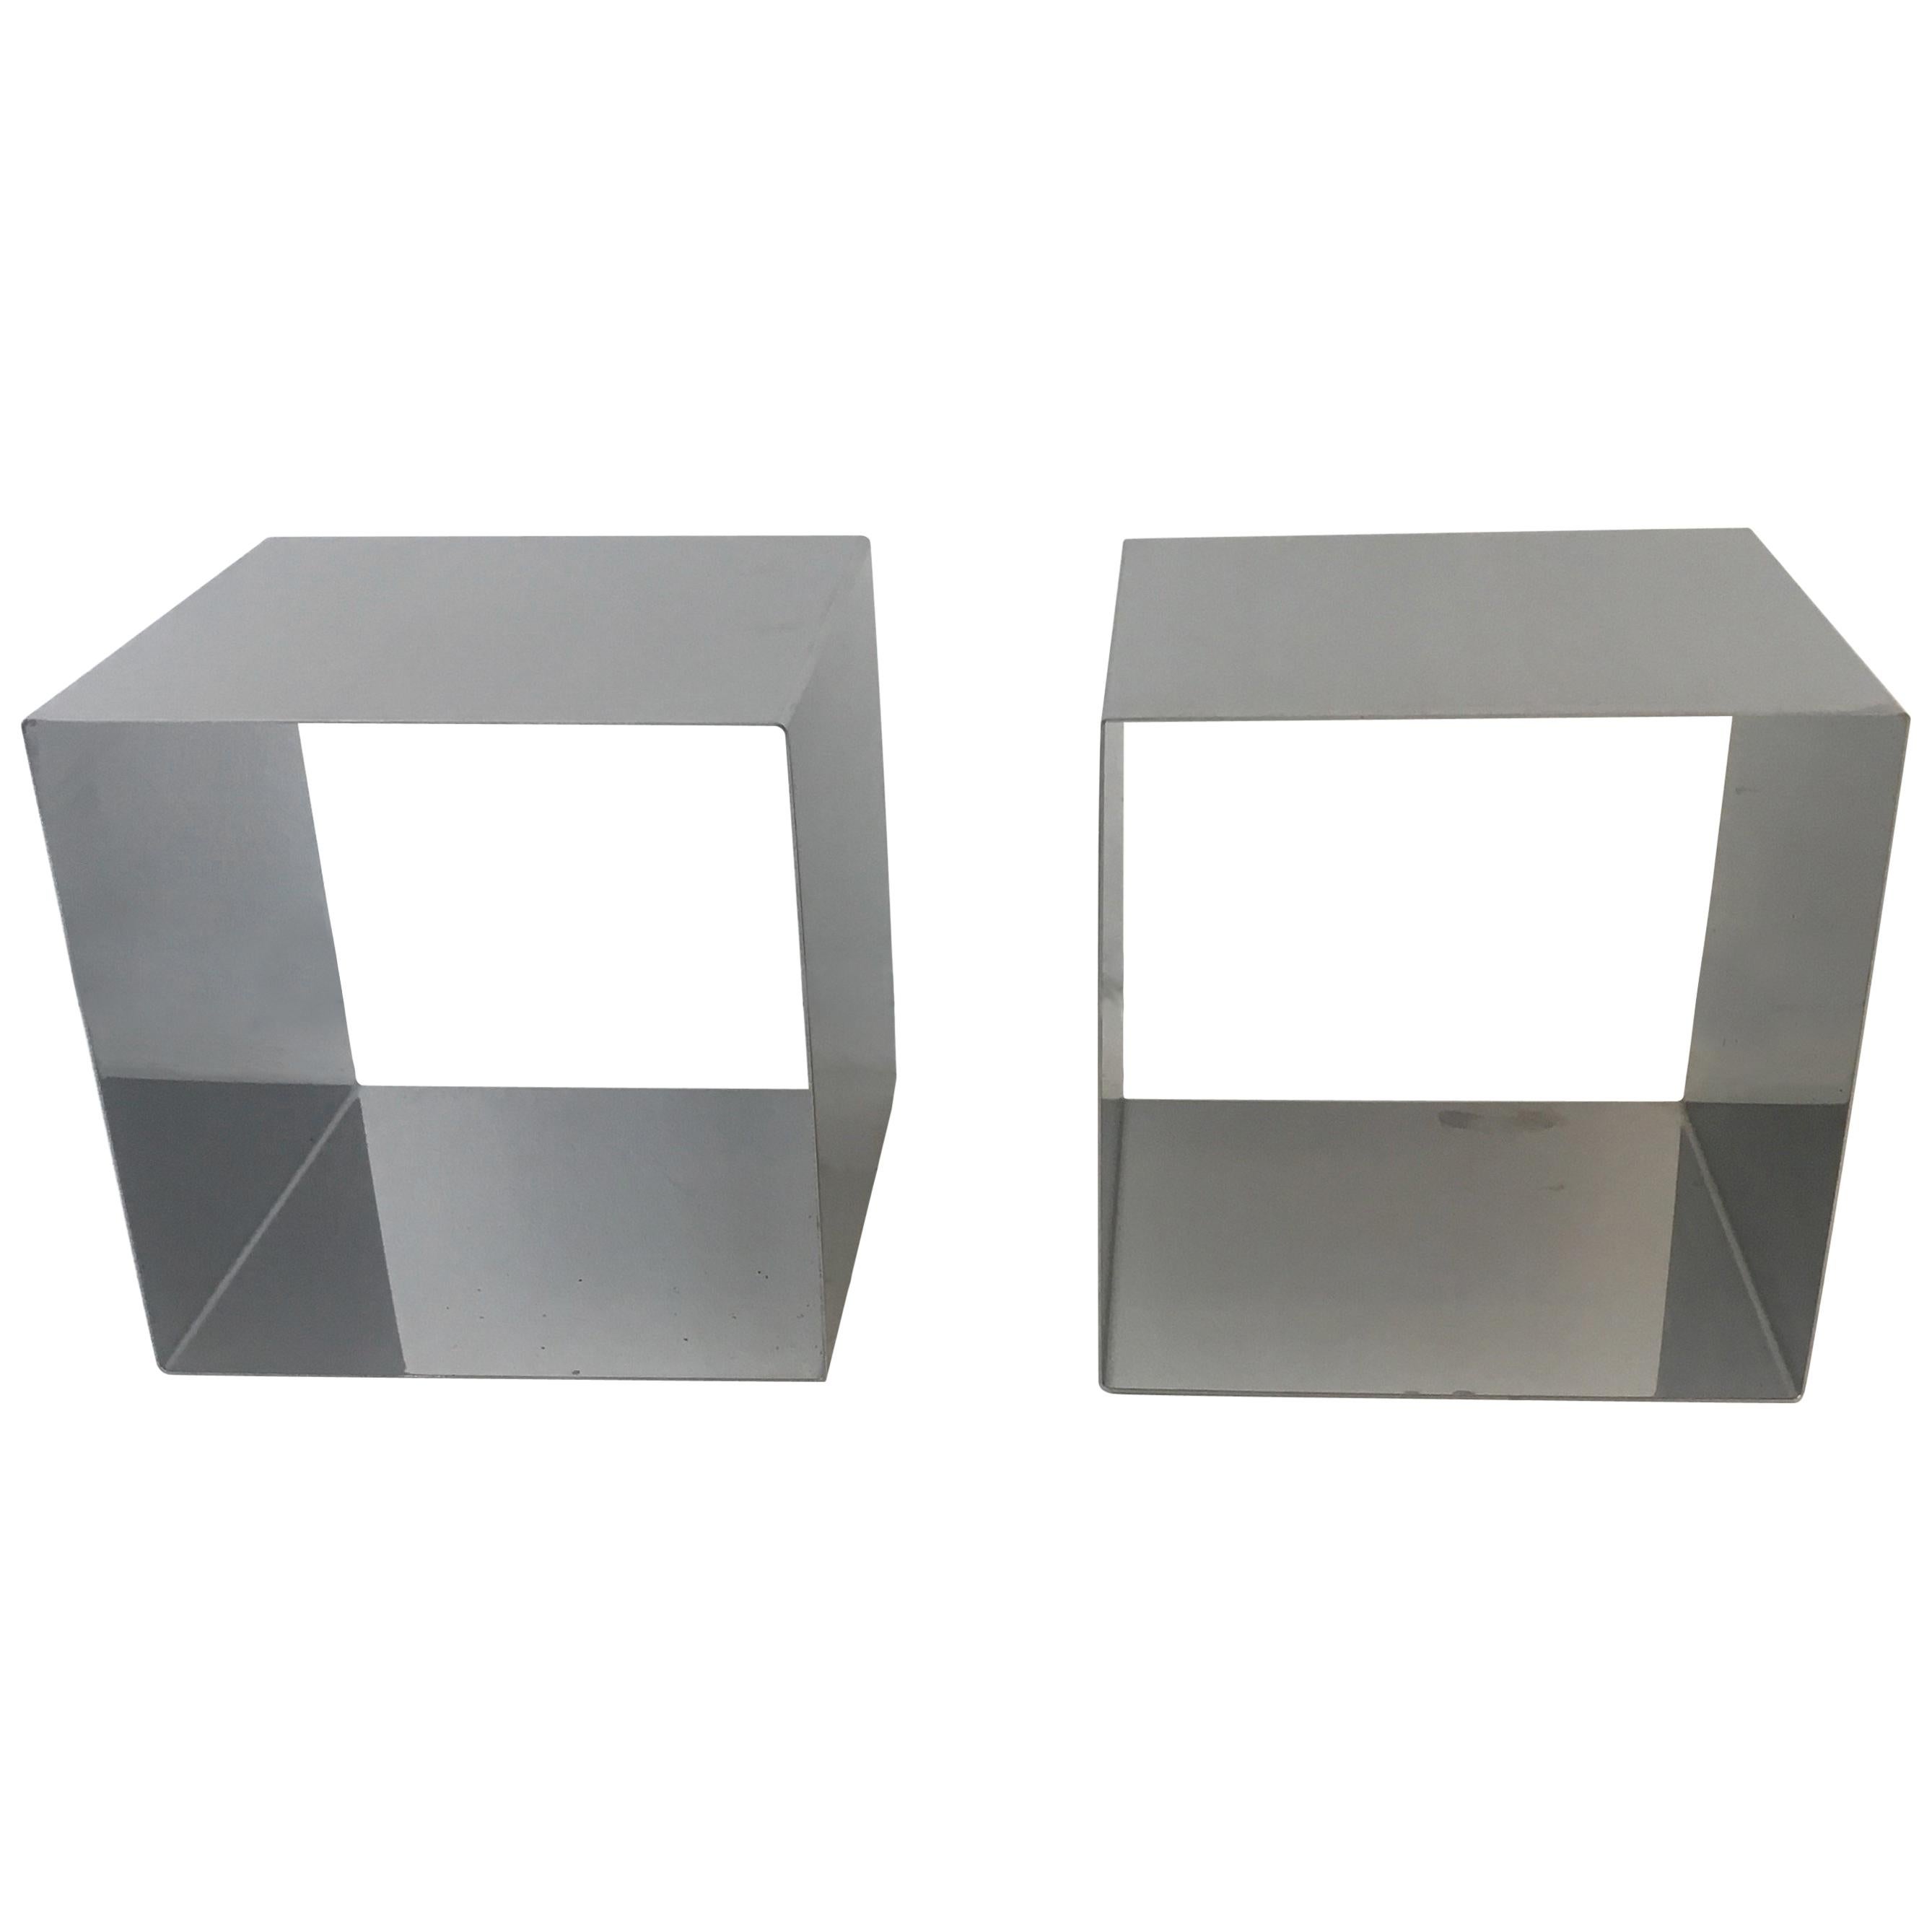 Pair of Cube Coffee Tables by Maria Pergay